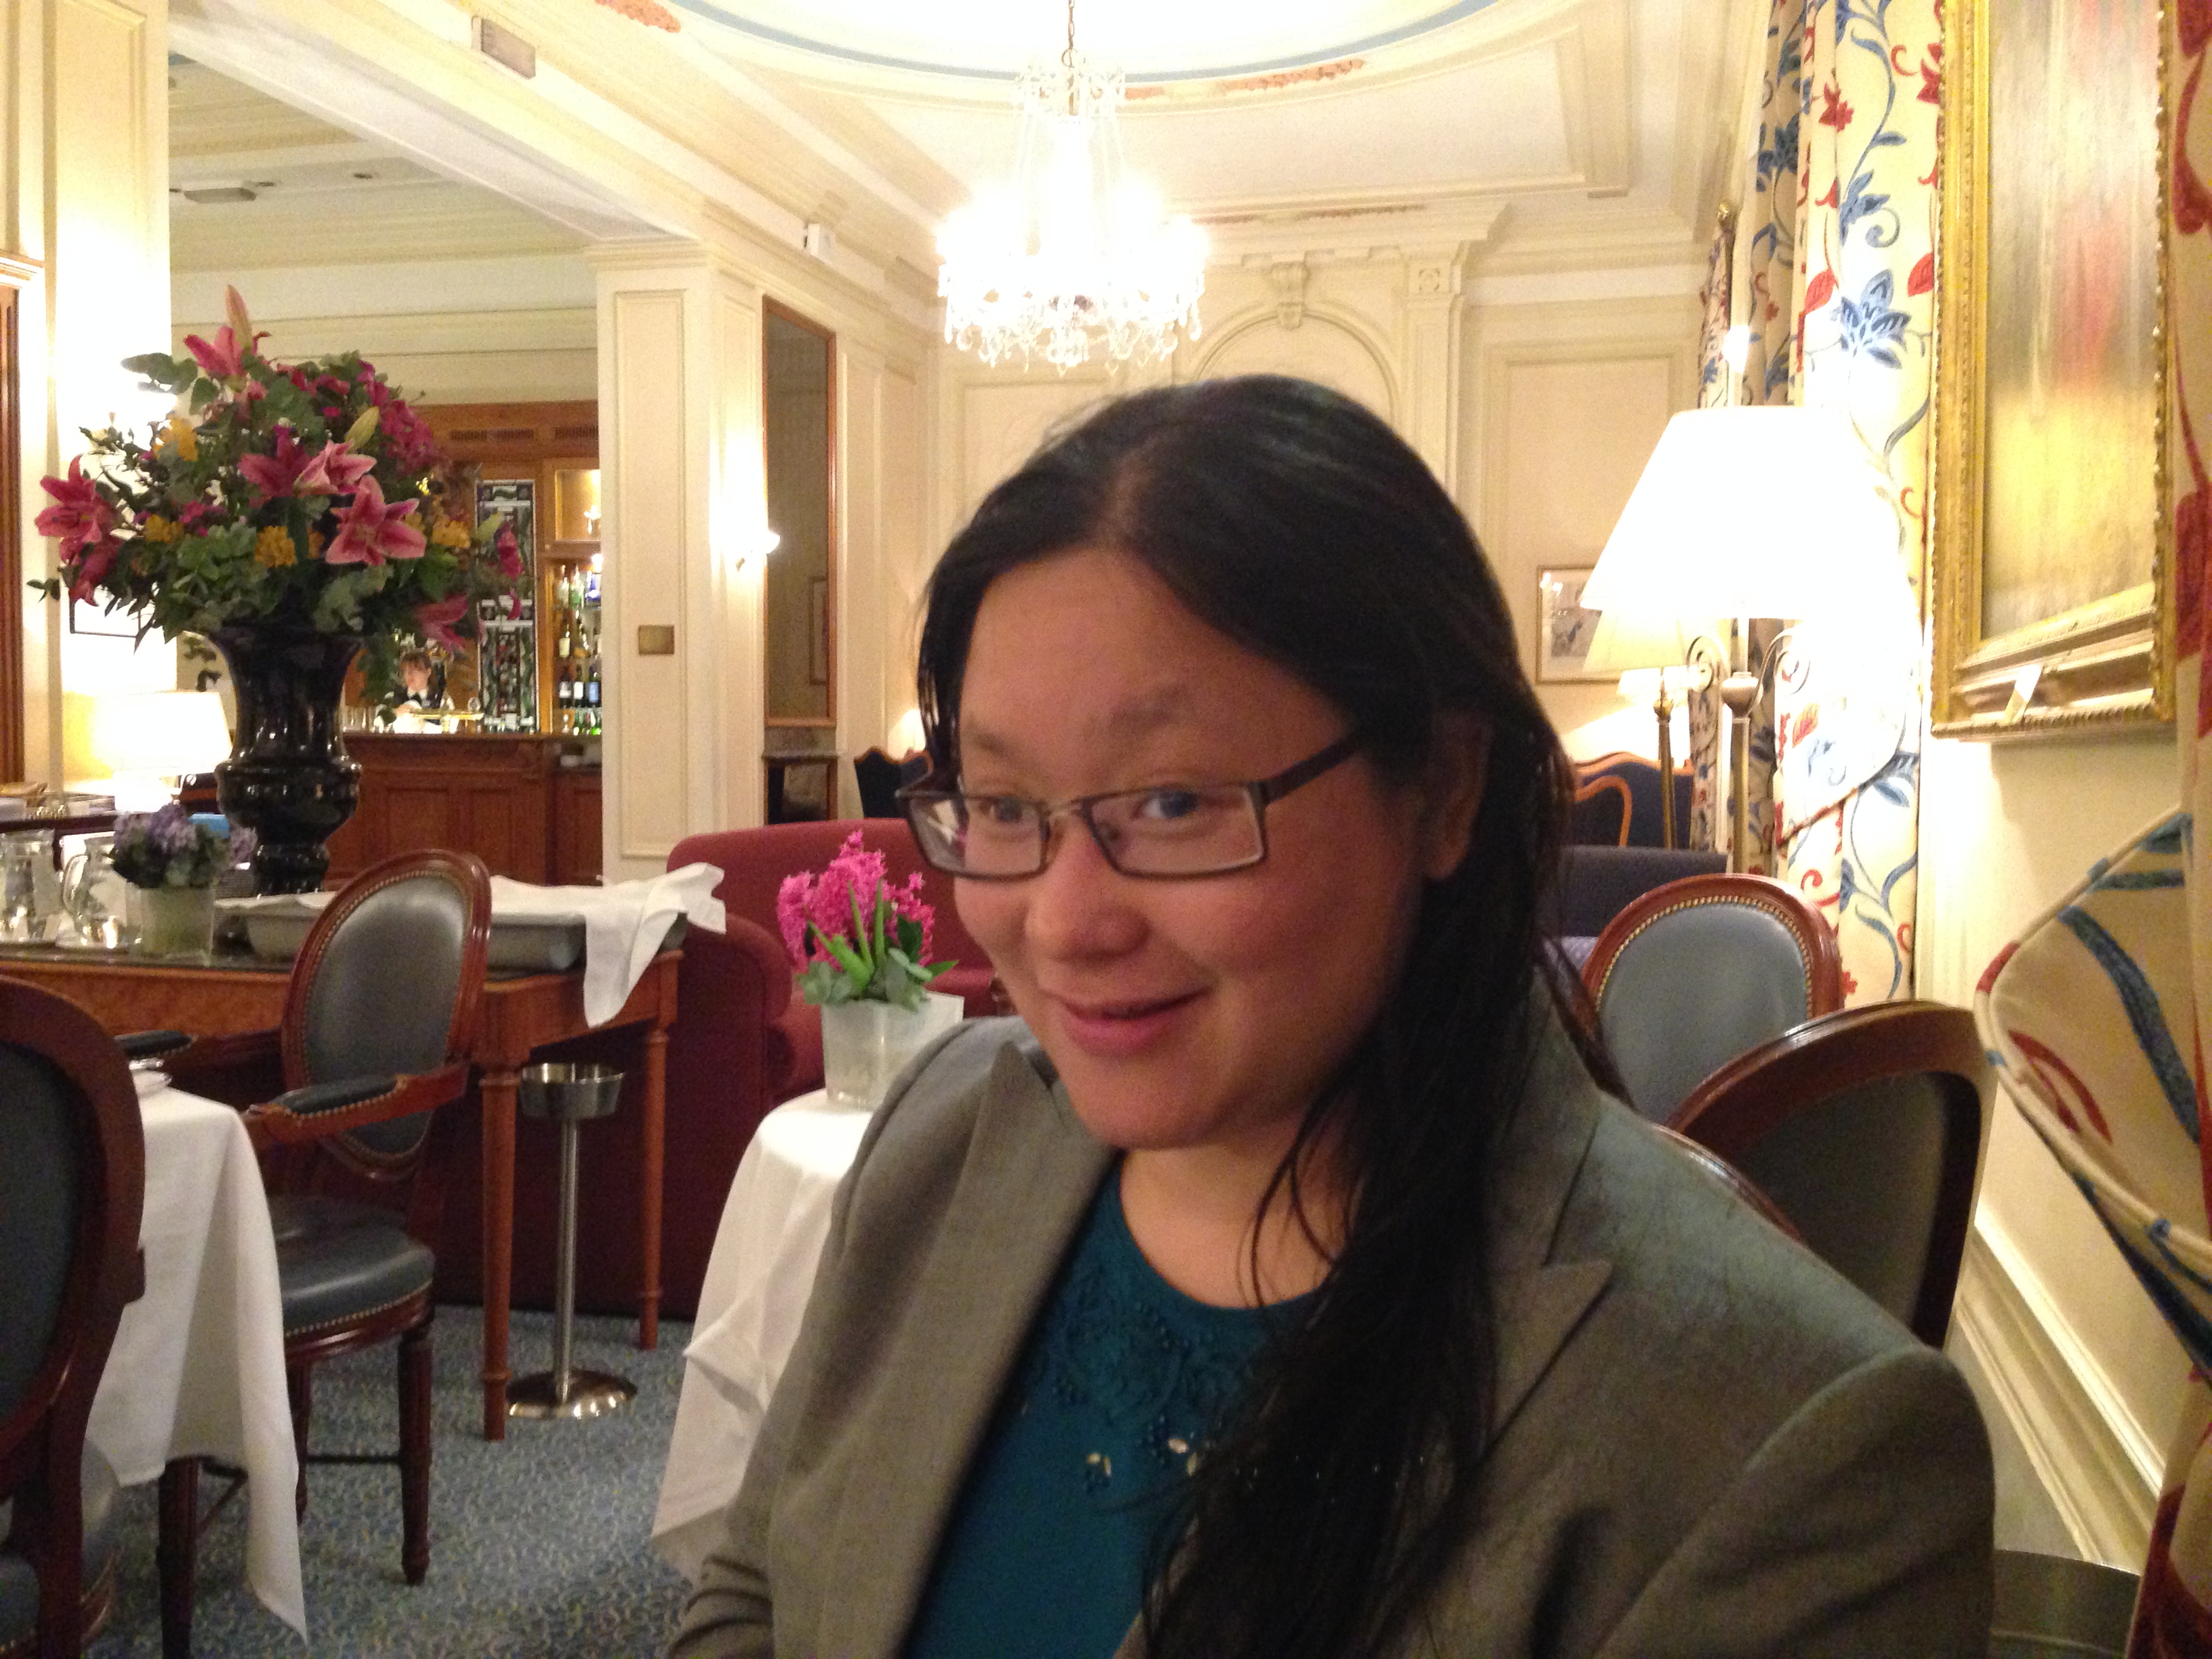 Sonia dining at the Royal Air Force Club in London, England, January 2014